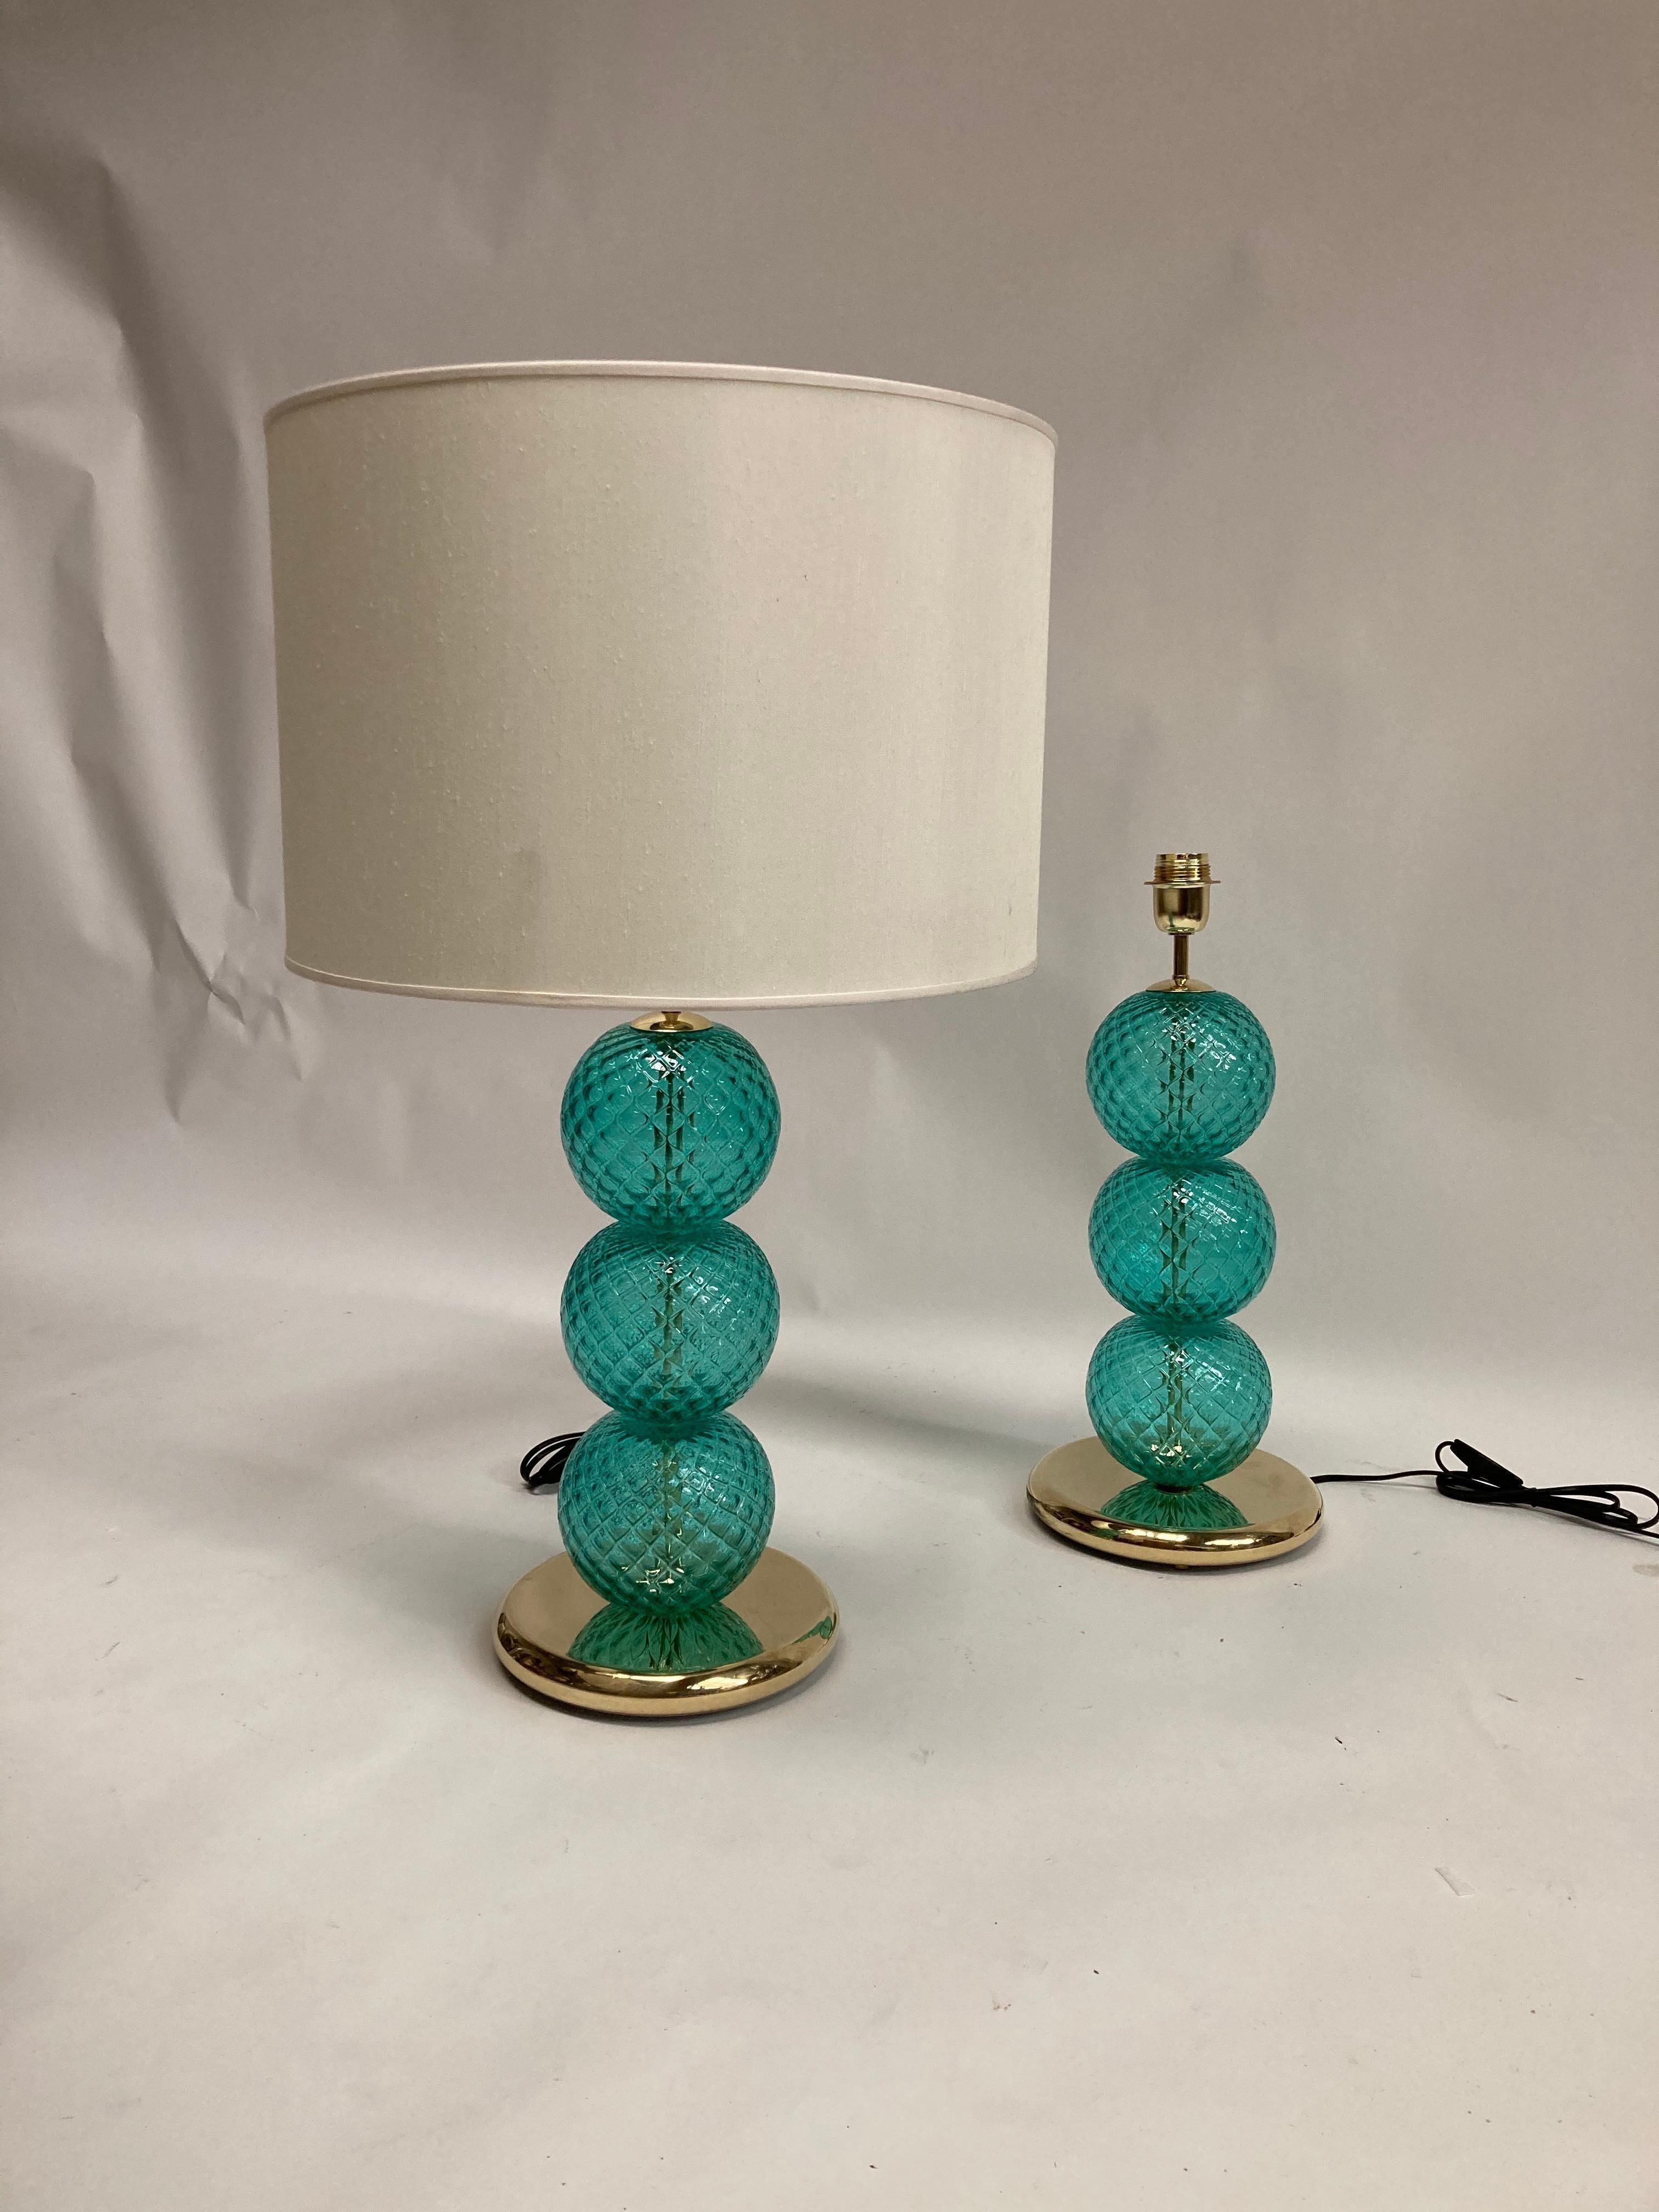 Very nice pair of table lamps made with Murano glass bowls
Italy.